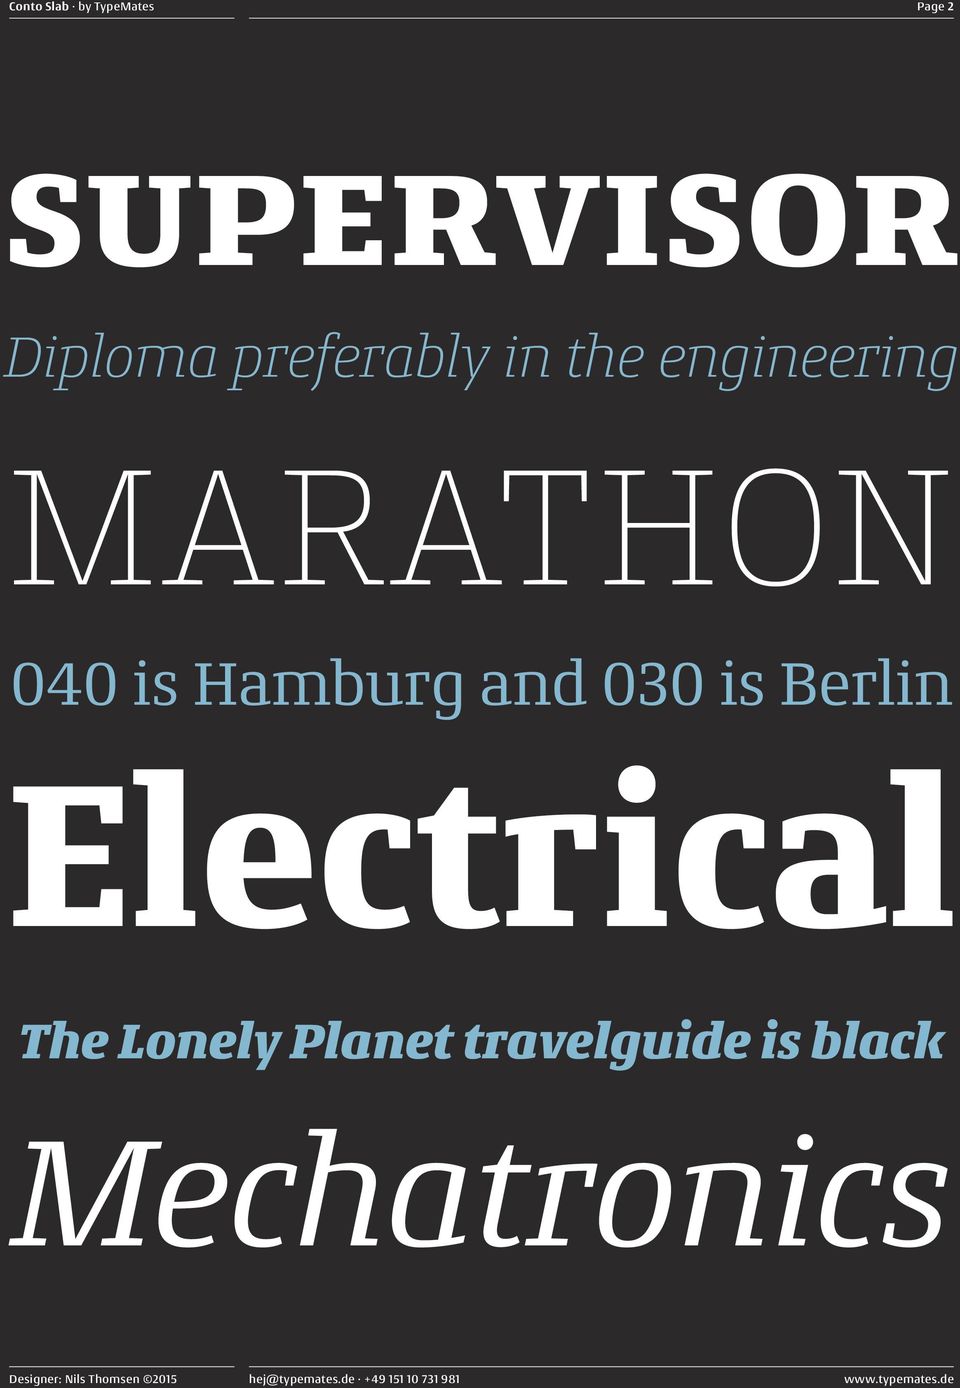 Electrical The Lonely Planet travelguide is black Mechatronics